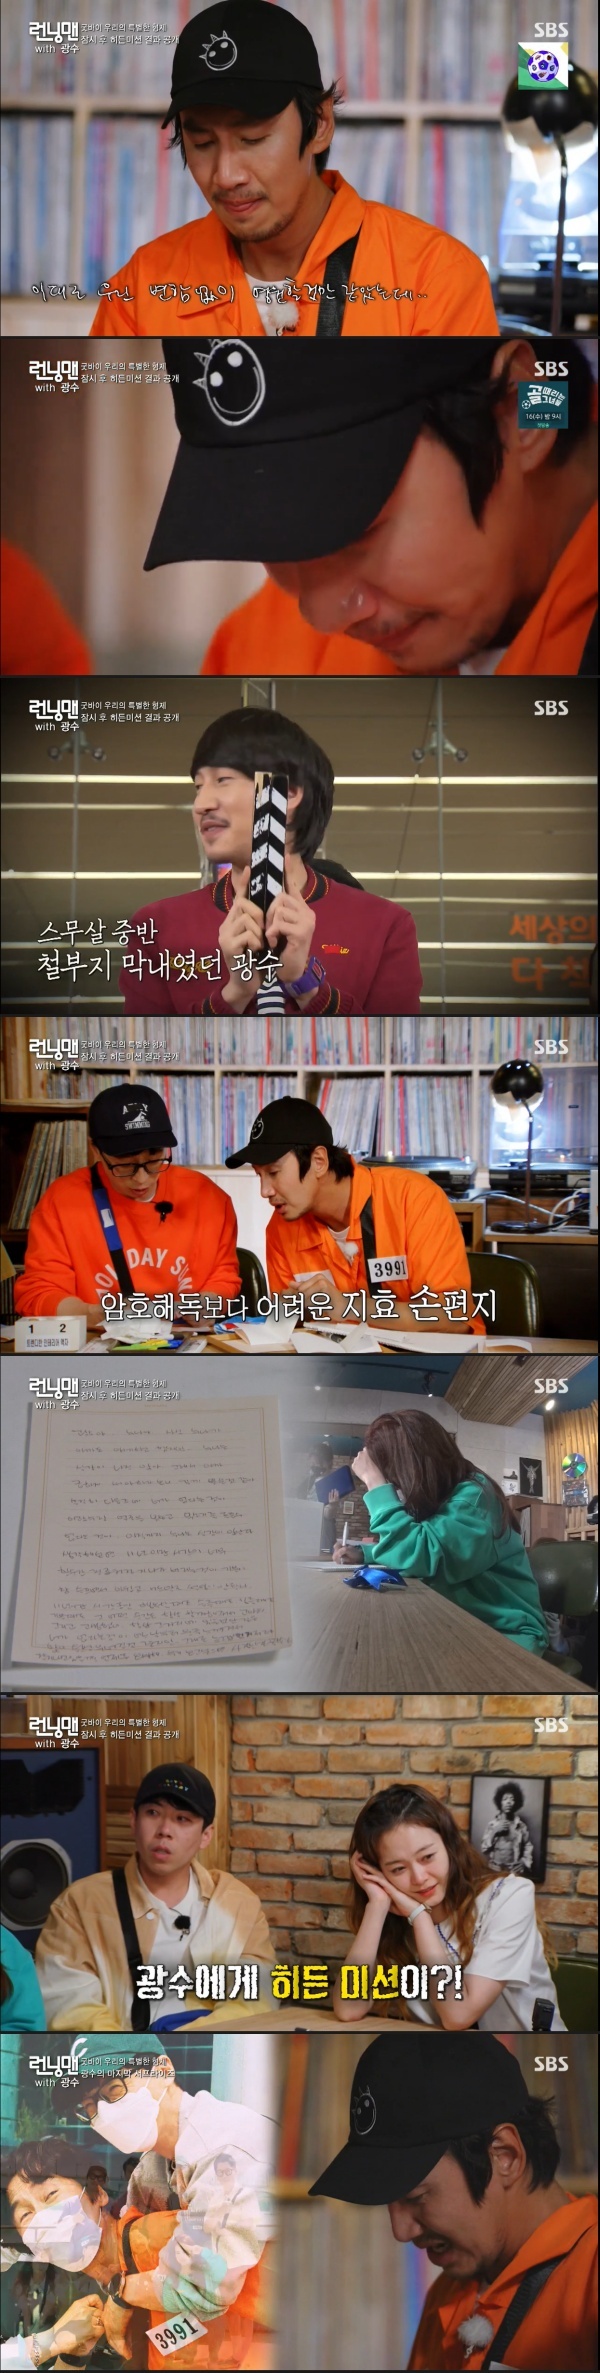 On the 13th SBS entertainment program Running Man, Lee Kwang-soos last broadcast was featured as Goodbye My Special Brother.As the last film is taken, Im trying to create a race that Lee Kwang-soo wants to try, the crew told Lee Kwang-soo.Lee Kwang-soo said, I want to go to the place where I first filmed 11 years ago. And I have photographed a lot in the Han River, but I want to go there.Lee Kwang-soo said, I wanted to eat it, but I had a chicken at my house before, and I want to eat it. I personally think it is a memorable food.I remember pork belly I had just eaten, and Ive been to many delicious places, and its been a long time since I had Memory, Lee Kwang-soo said.I went to the LP bar on that turn, but I thought I could go again.Lee Kwang-soo said with his troubled eyes, I personally want to be like usual, and I want to be like usual.The production team said, We must end the 11-year Running Man life and send it to society. We must cleanly educate Lee Kwang-soo, who has done a lot of sins and actions.The crew said, I have been taking the judge directly to see how much Lee Kwang-soos bad things would be if he actually committed a crime.Former judge Jung Jae-min said, I did 58 times of property damage. 353 times of assault. 37 times of performance pornography.I tied it up as a fraud, but 1812 cases came out. He ruled that the defendant Lee Kwang-soo was sentenced in 1050.From now on, members and Lee Kwang-soo have announced the start of the full-scale mission, saying that they should reduce their sentences through the mission at the Goodbye My Special Brother Race.It was a rule that ended the race when the sentence was cut down; on that day, Yoo Jae-Suk joked to Lee Kwang-soo, Think again, you can overturn it.Haha said, You are a character who can do it.On this day, the members and Lee Kwang-soo wrote and read each others last letters: I dont know what was so enjoyable, but we were going to be one invariably.Lets go with you for the rest of your life, youre always healthy, you son of a bitch.Lee Kwang-soo wrote to the members on the day, saying, I do not know what to say because I do not feel it yet. Then he showed tears and said, I am sorry.Im sorry, said Lee Kwang-soo, but Ive done my best every week, not for eleven years.I would like to ask more love to the members who do their best every week and break down their bodies. On this day, the production team told Lee Kwang-soo that he succeeded in Hiddenmission for the members.The finest wines that were taken as a commission product on this day were gifts purchased by Lee Kwang-soo for the members themselves and were able to deliver the gift only if he succeeded in his Hiddenmission.The members were moved again by Lee Kwang-soo.Yoo Jae-Suk said, I have been suffering so much, and come out again next week. Lee Kwang-soo was tearful.On the other hand, SBS Running Man is broadcast every Sunday at 5 pm.